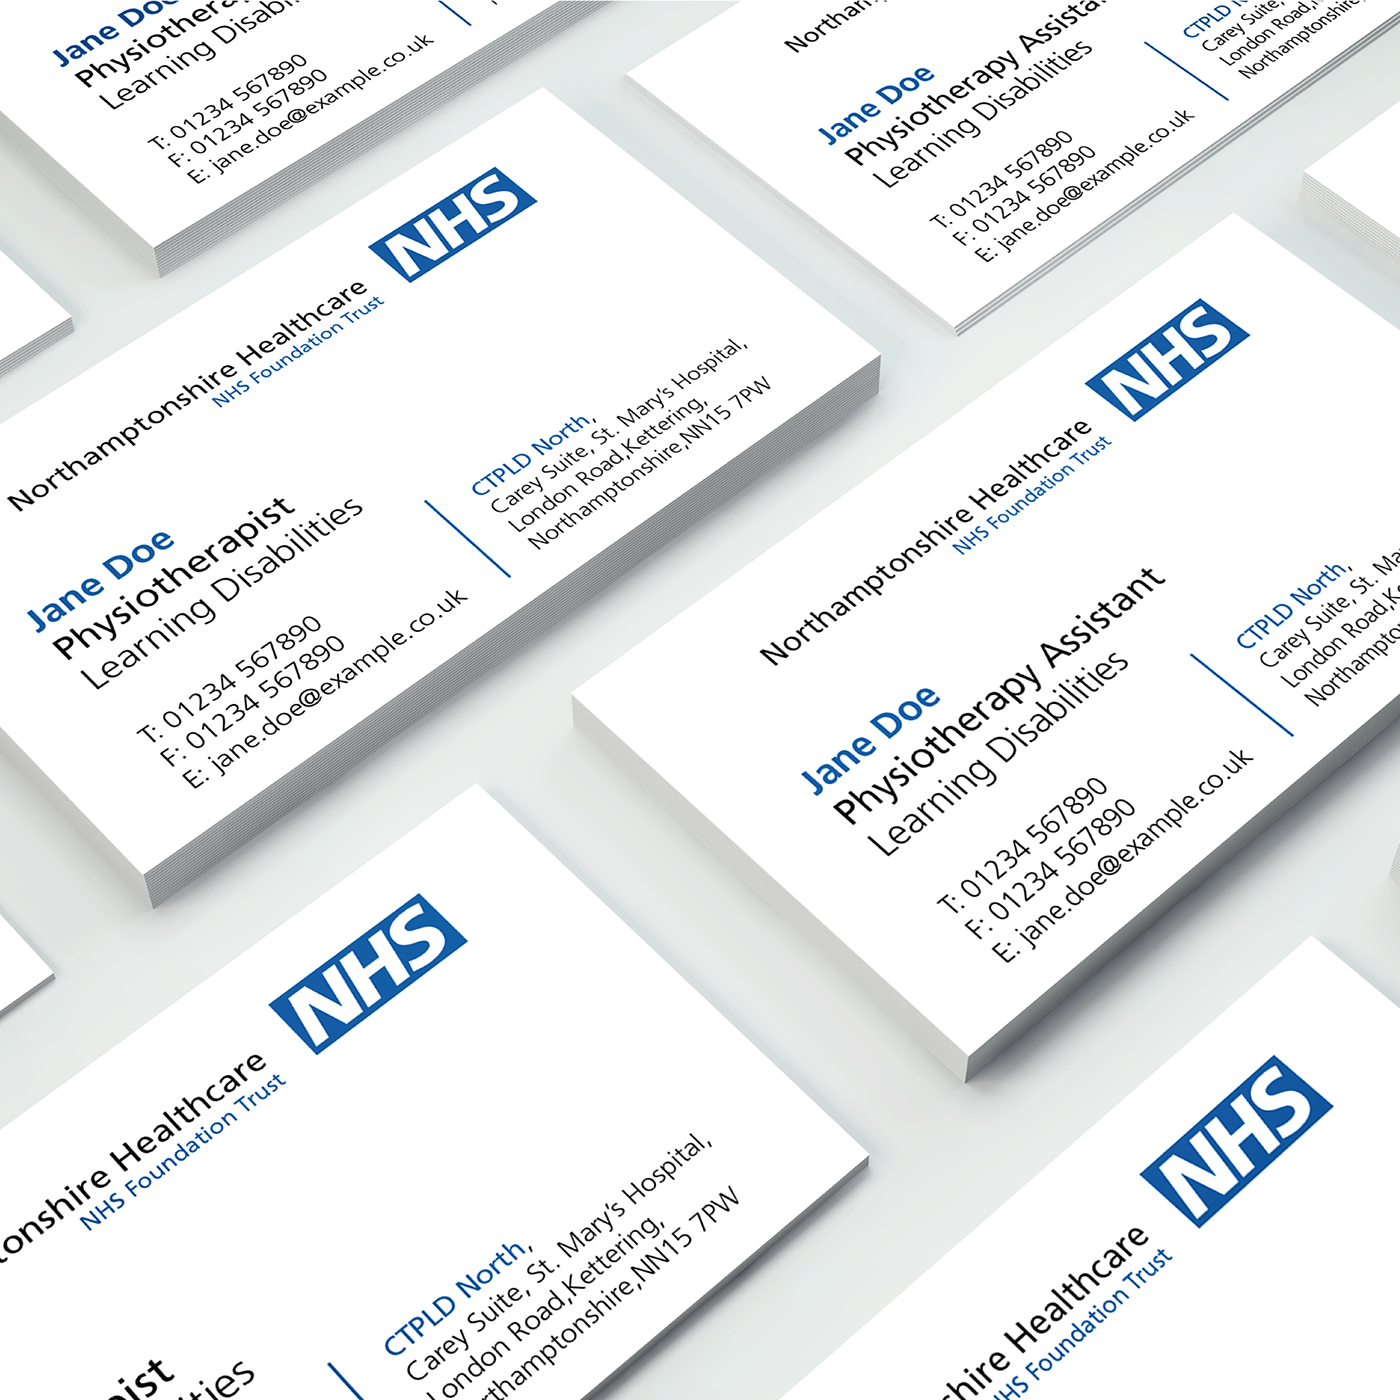 Business Cards graphic design 